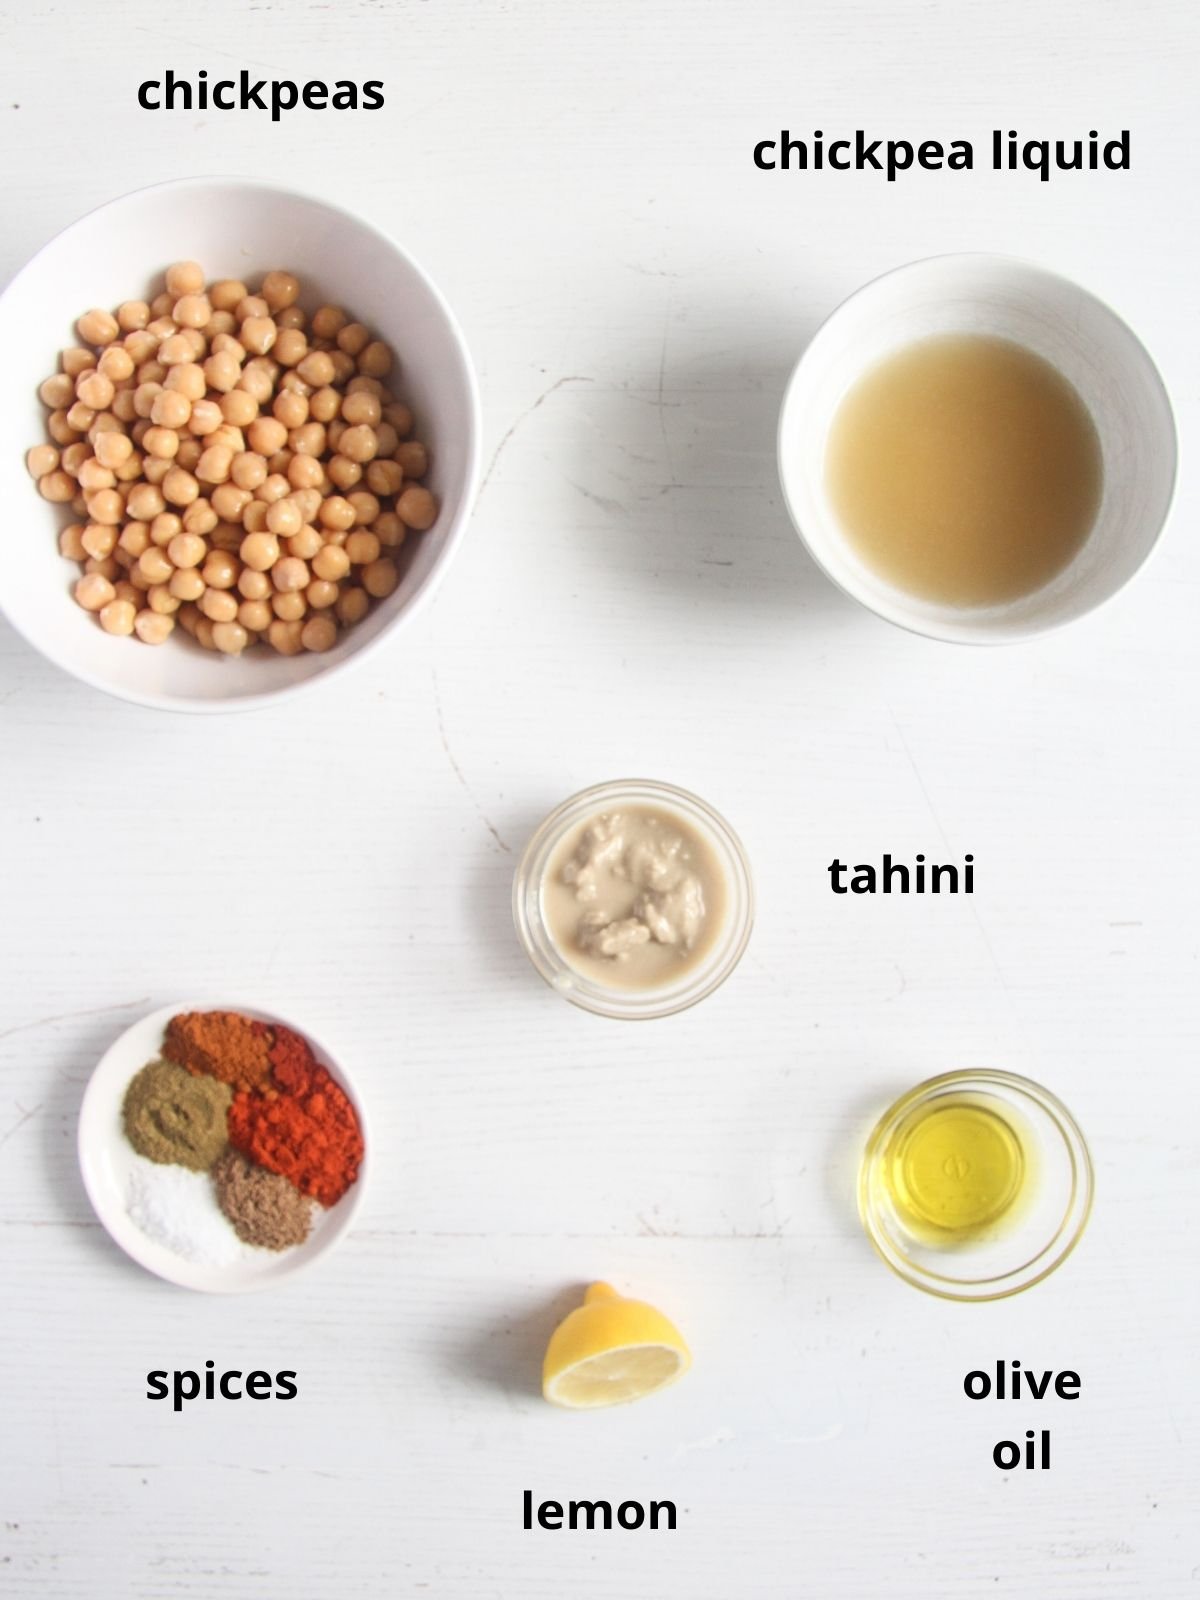 listed ingredients for making hummus on the table.